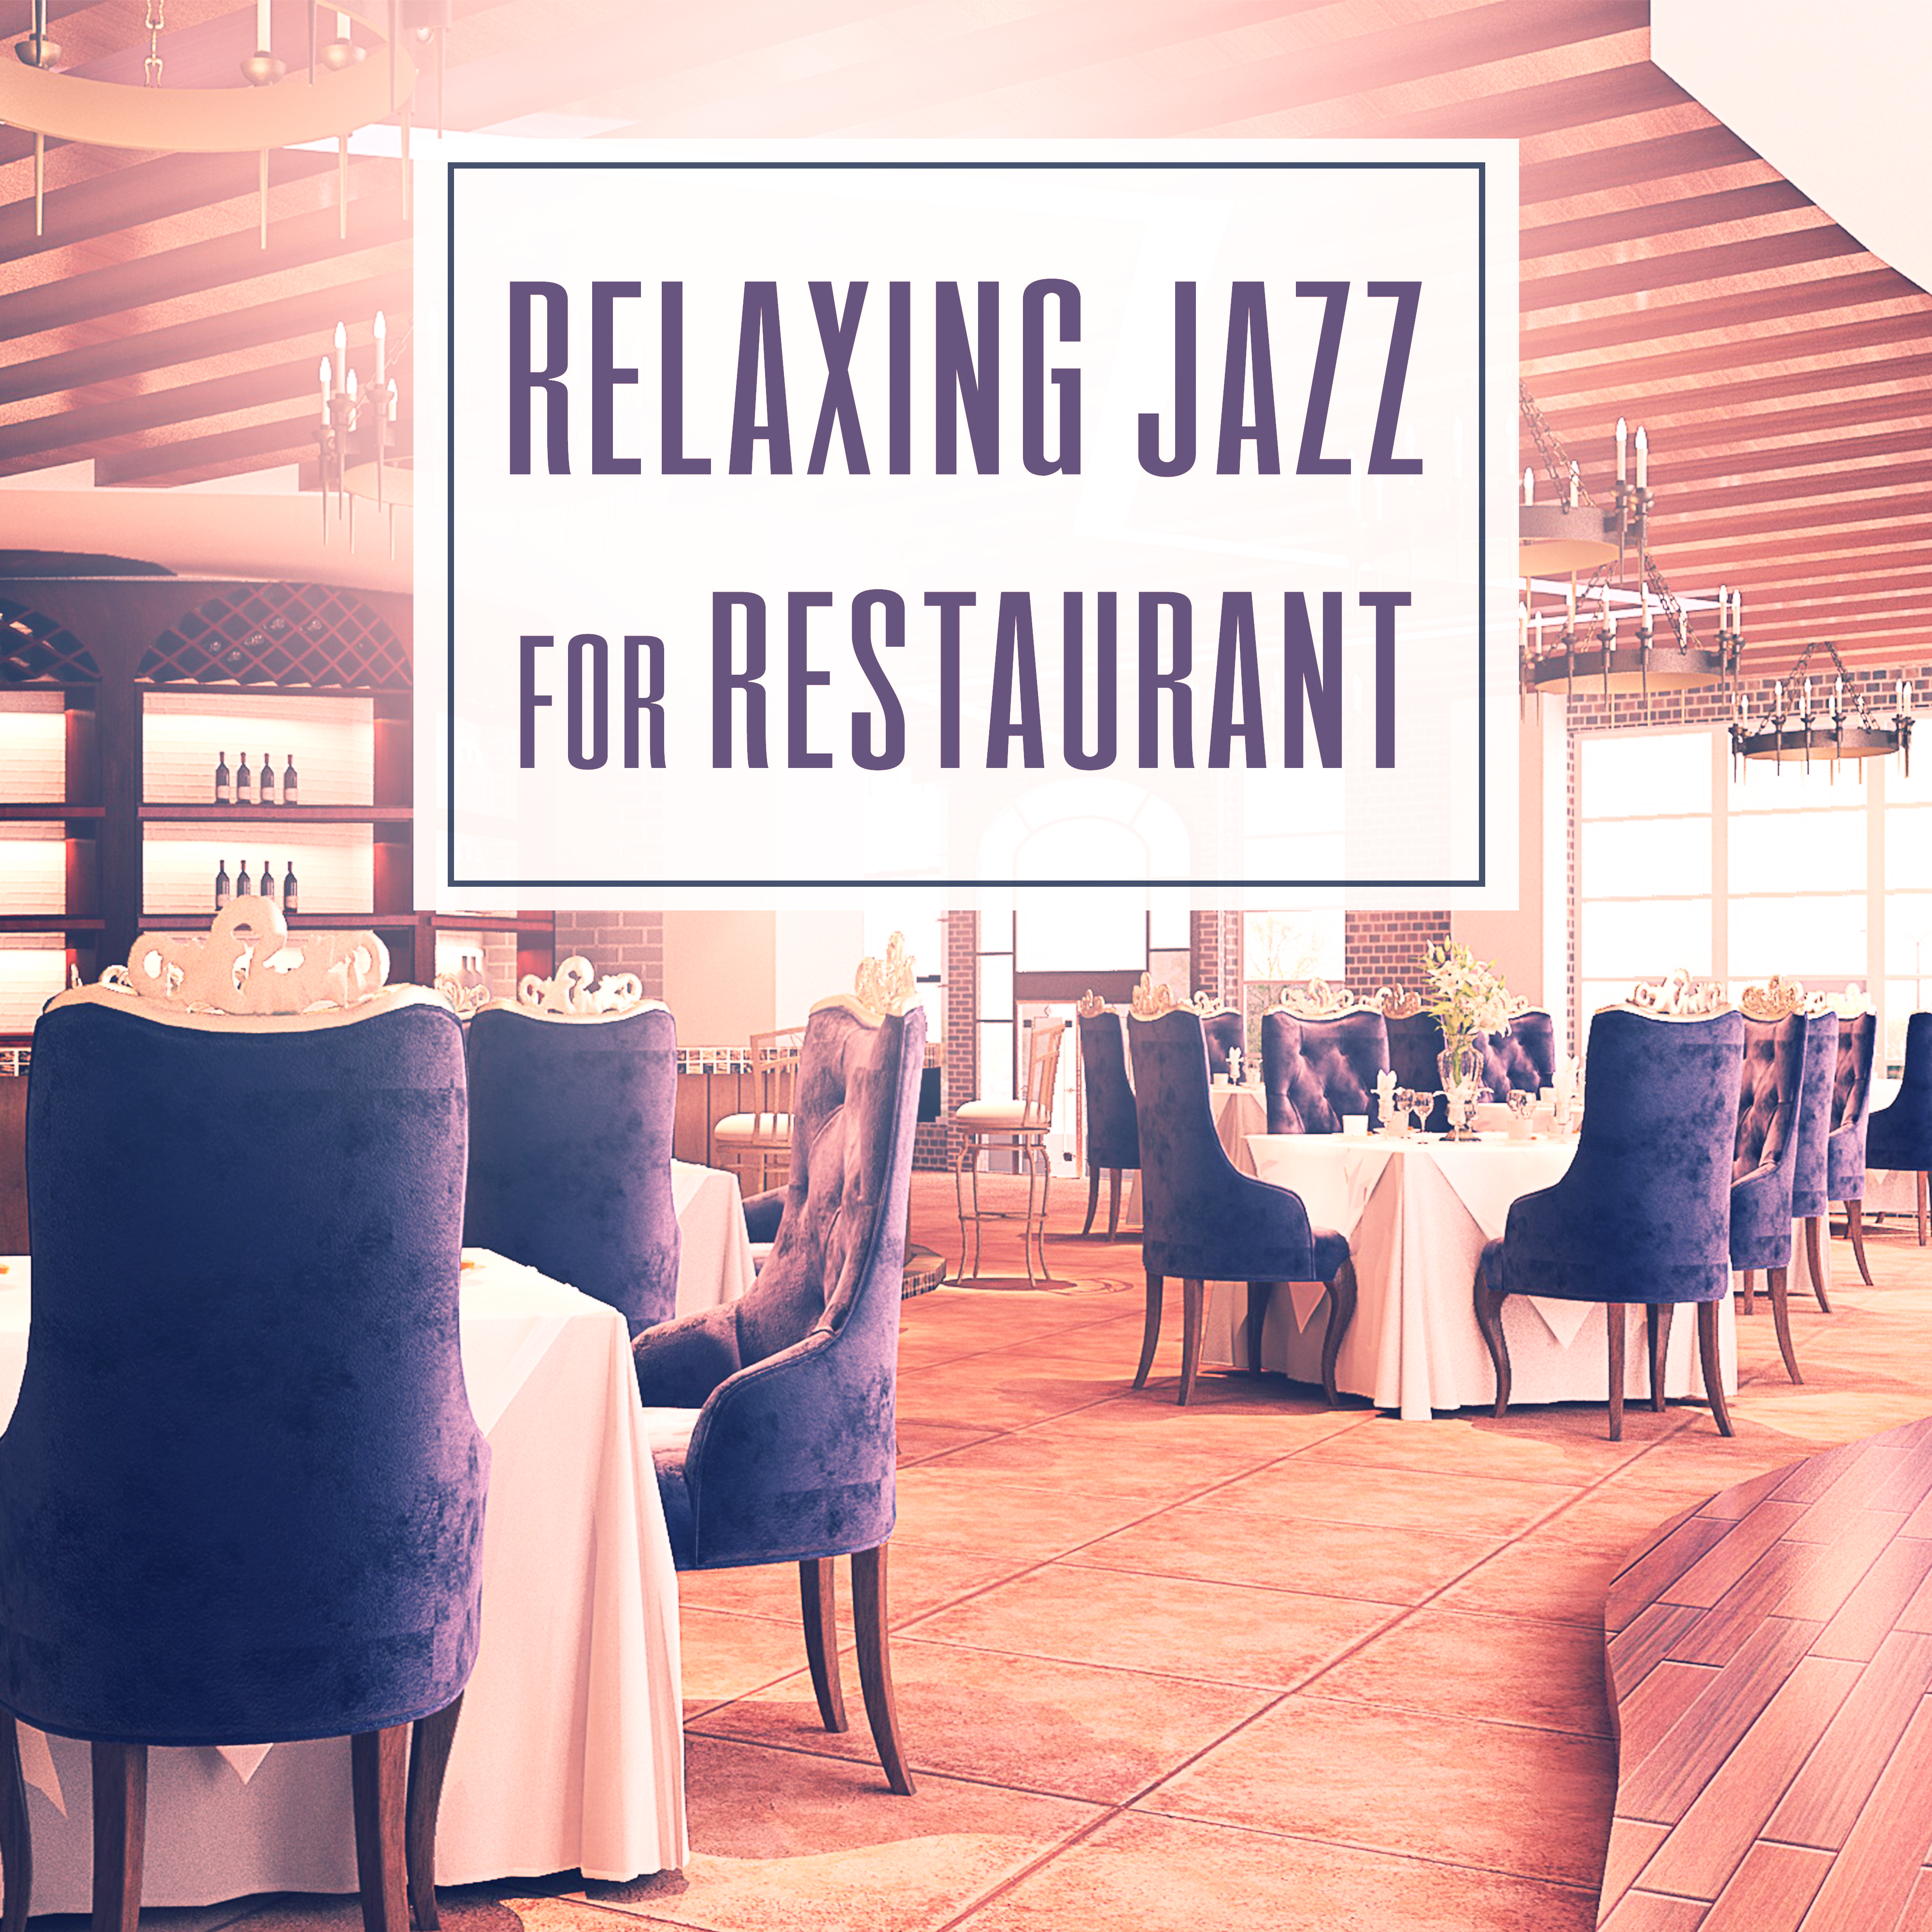 Relaxing Jazz for Restaurant  Calm Music to Relax, Soft Sounds of Jazz, Background Piano Bar